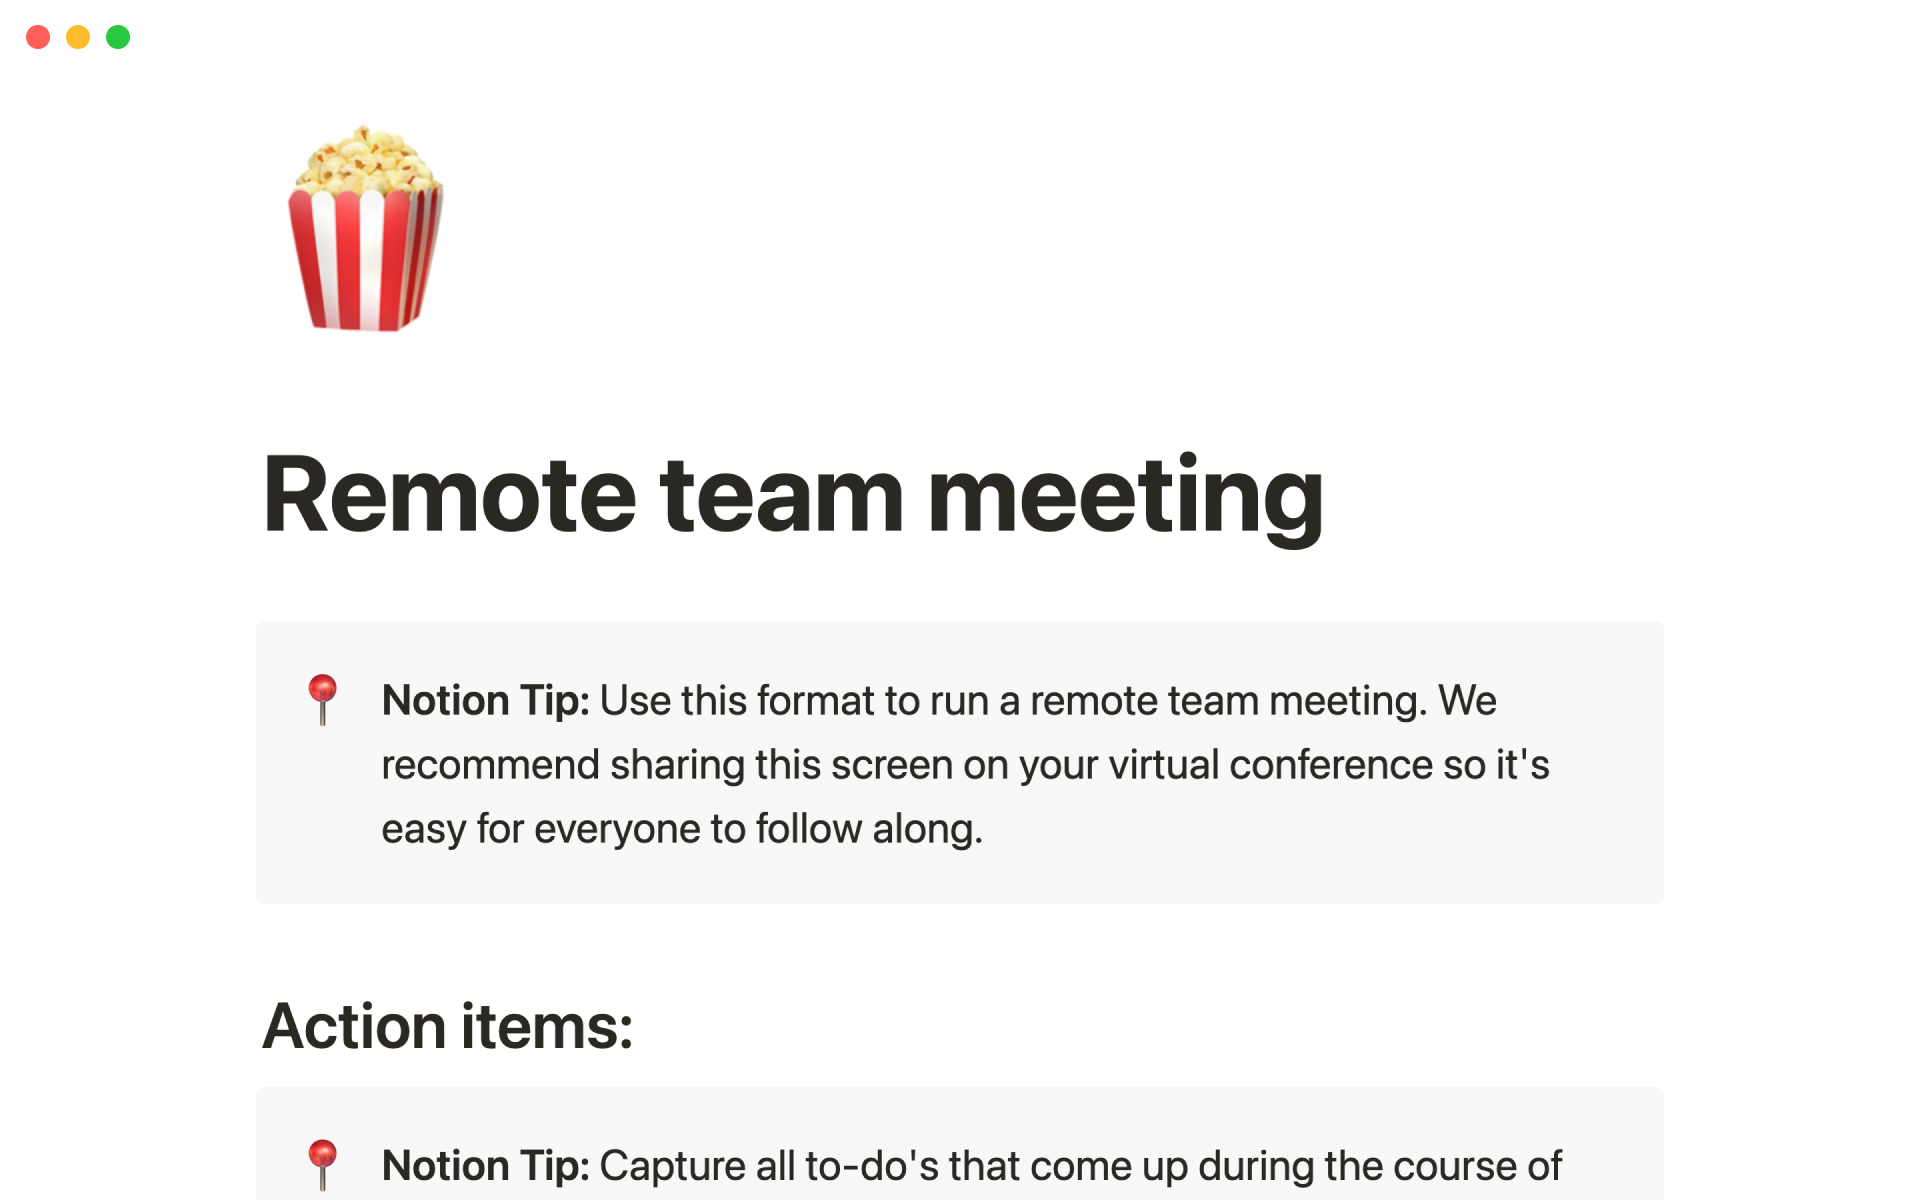 Use this format to run a remote team meeting.